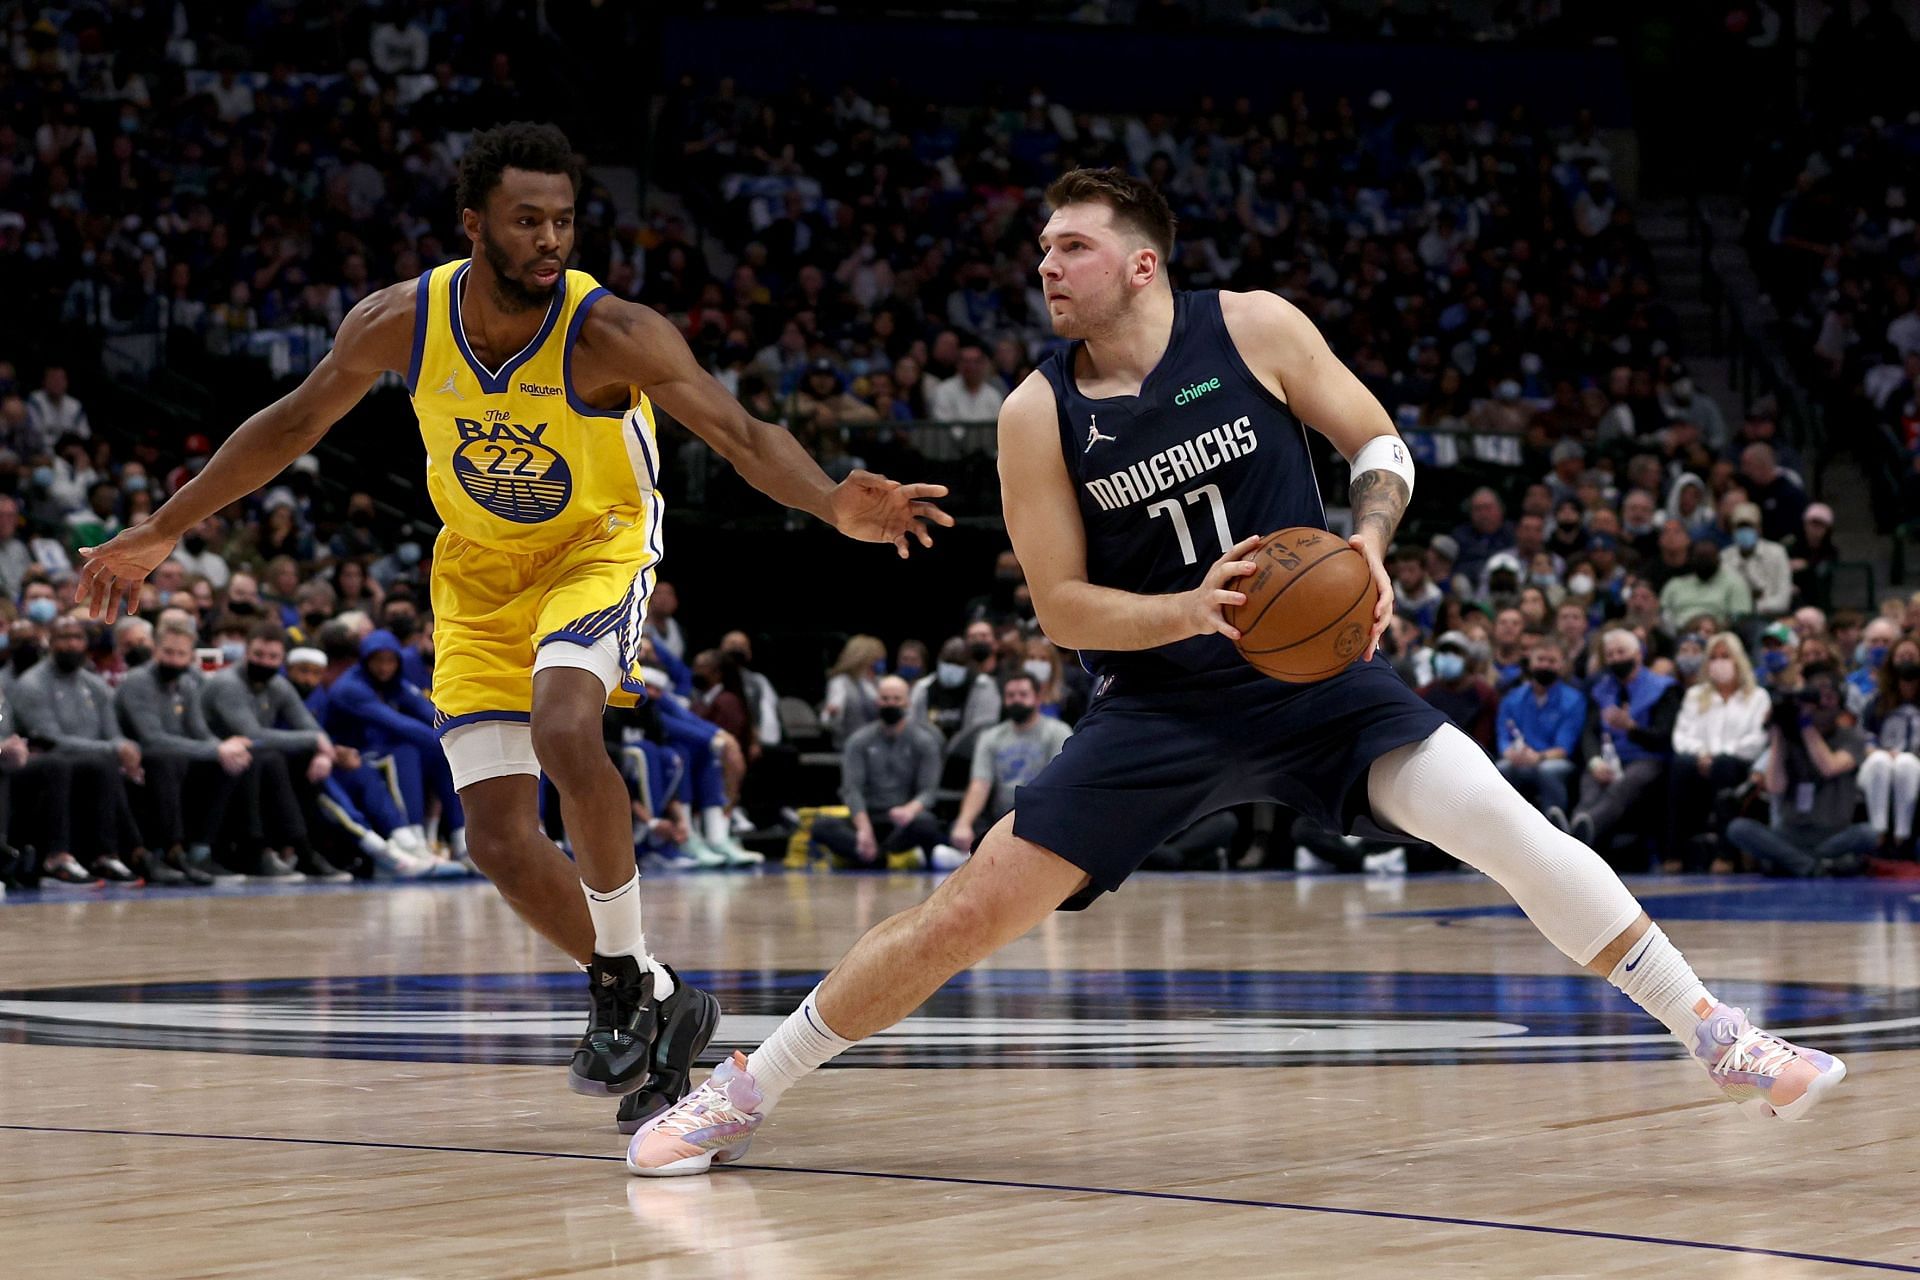 Andrew Wiggins of the Golden State vs Luka Doncic of the Mavericks